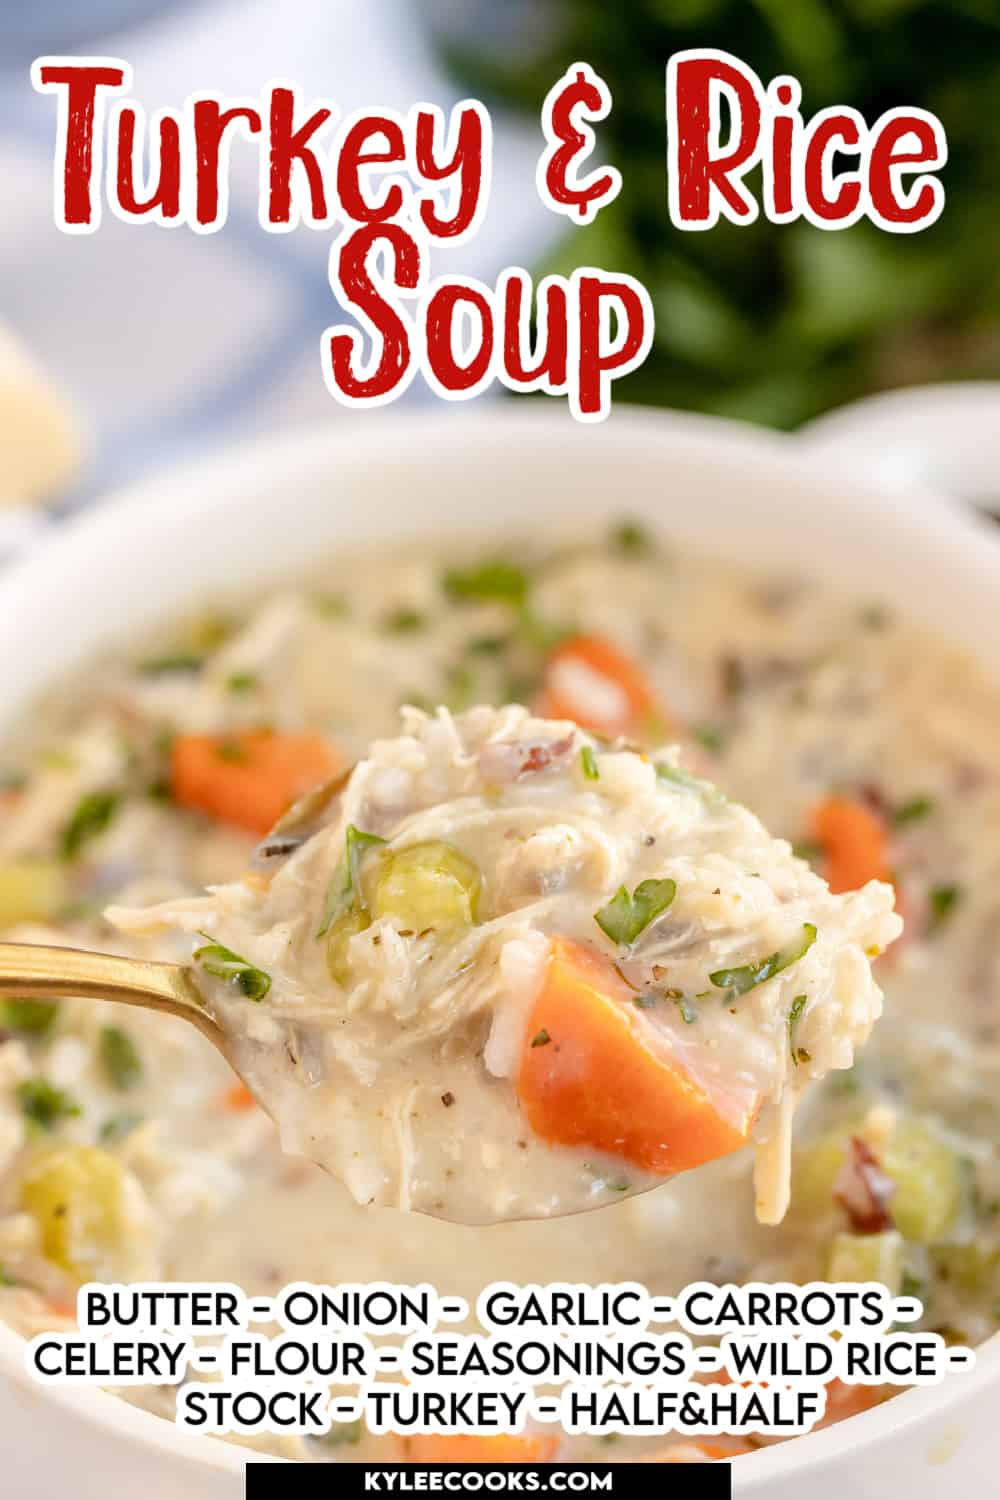 turkey rice soup in a white bowl, with recipe name and ingredients overlaid in text.